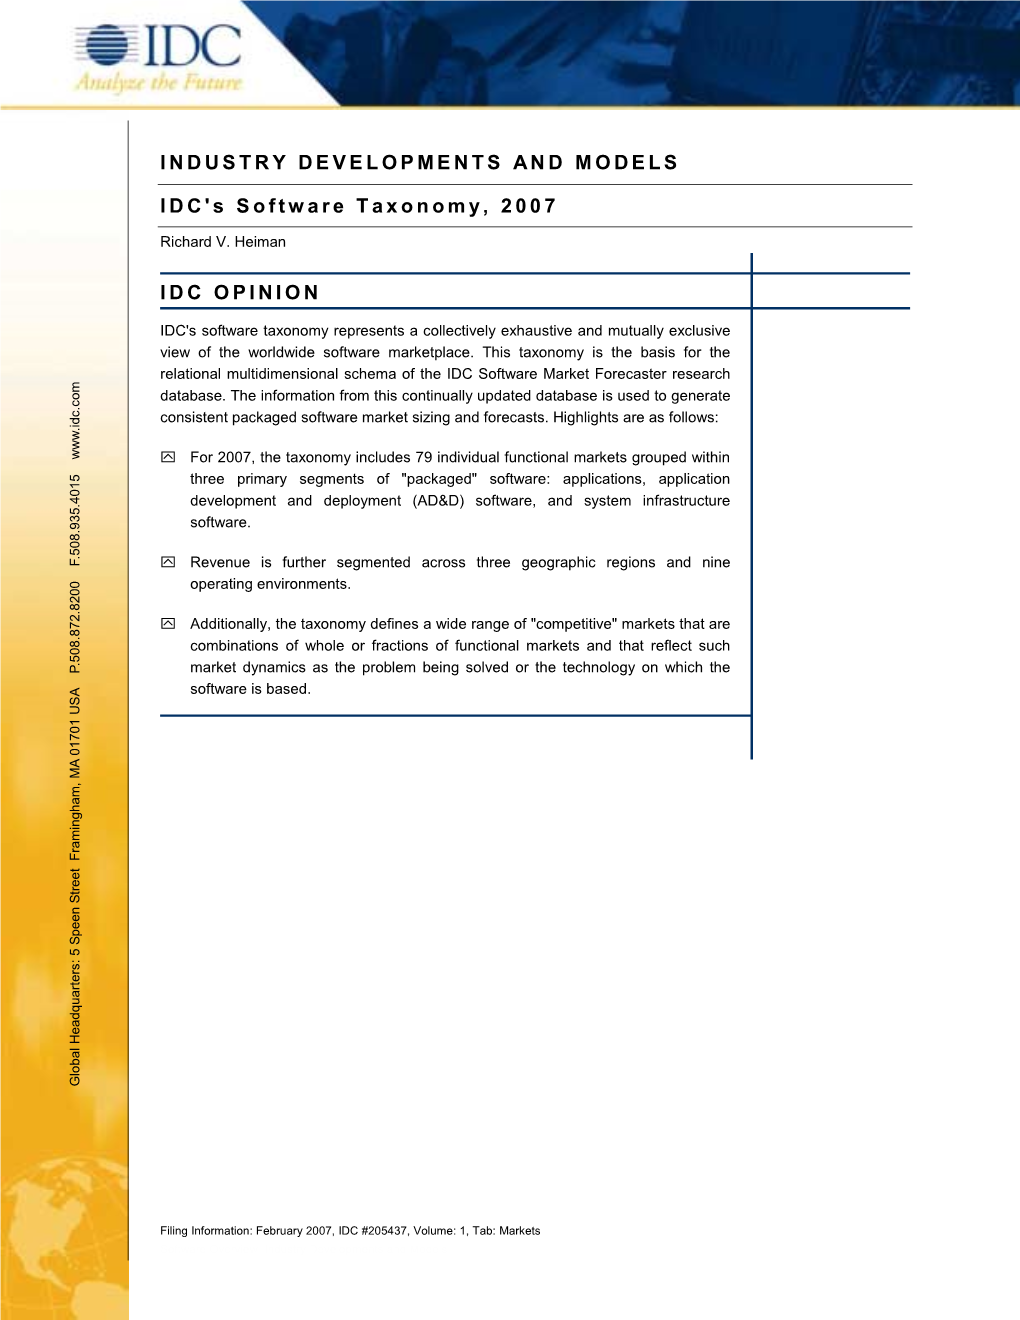 INDUSTRY DEVELOPMENTS and MODELS IDC's Software Taxonomy, 2007 IDC OPINION